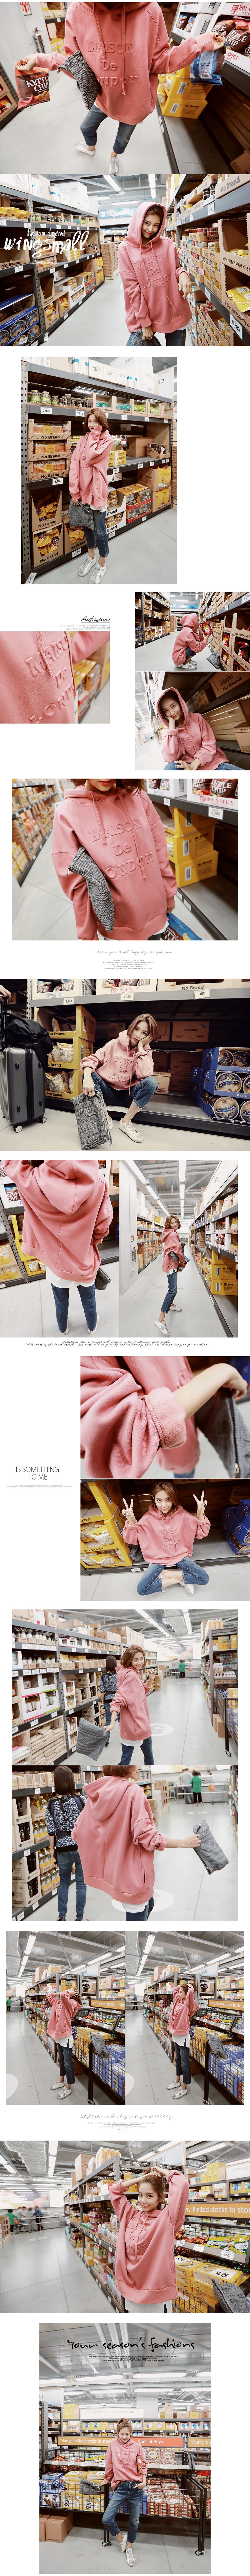 [Limited Quantity Sale] Embossed Letters Oversized Fleece Hoodie Sweatshirt Pink One Size(Free)